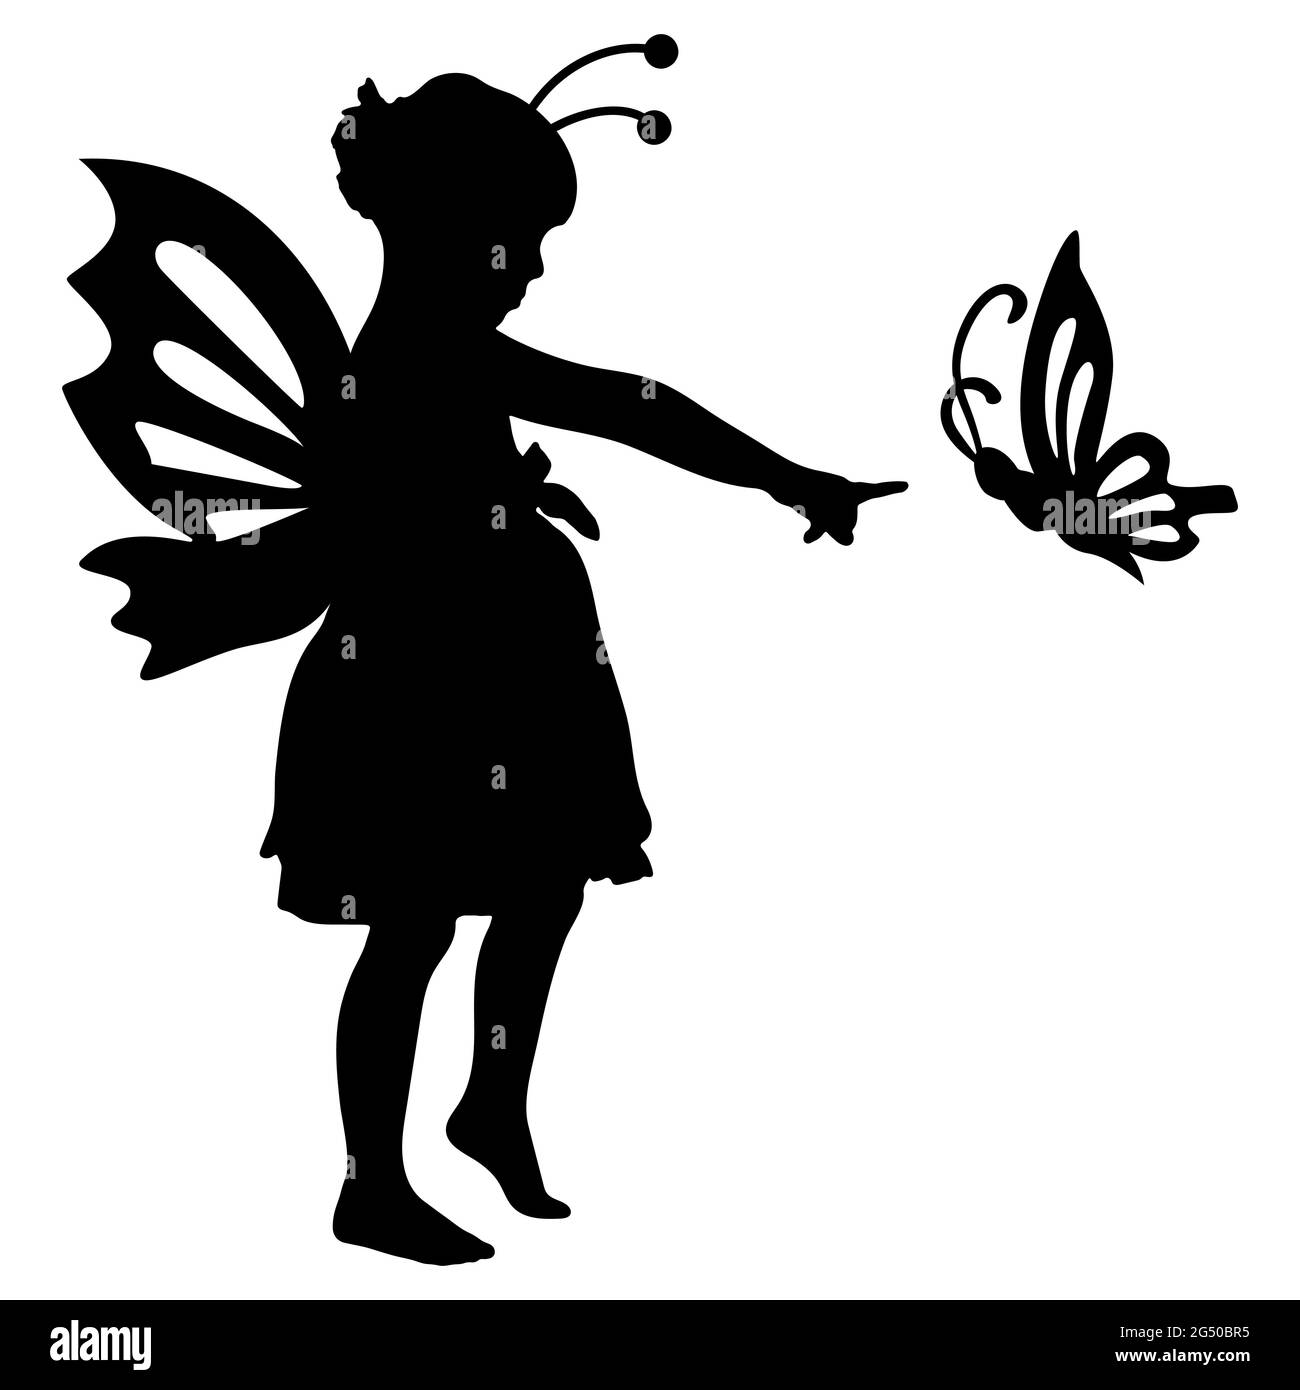 Little girl silhouette with buttefly wings. Vector illustration. Stock Vector